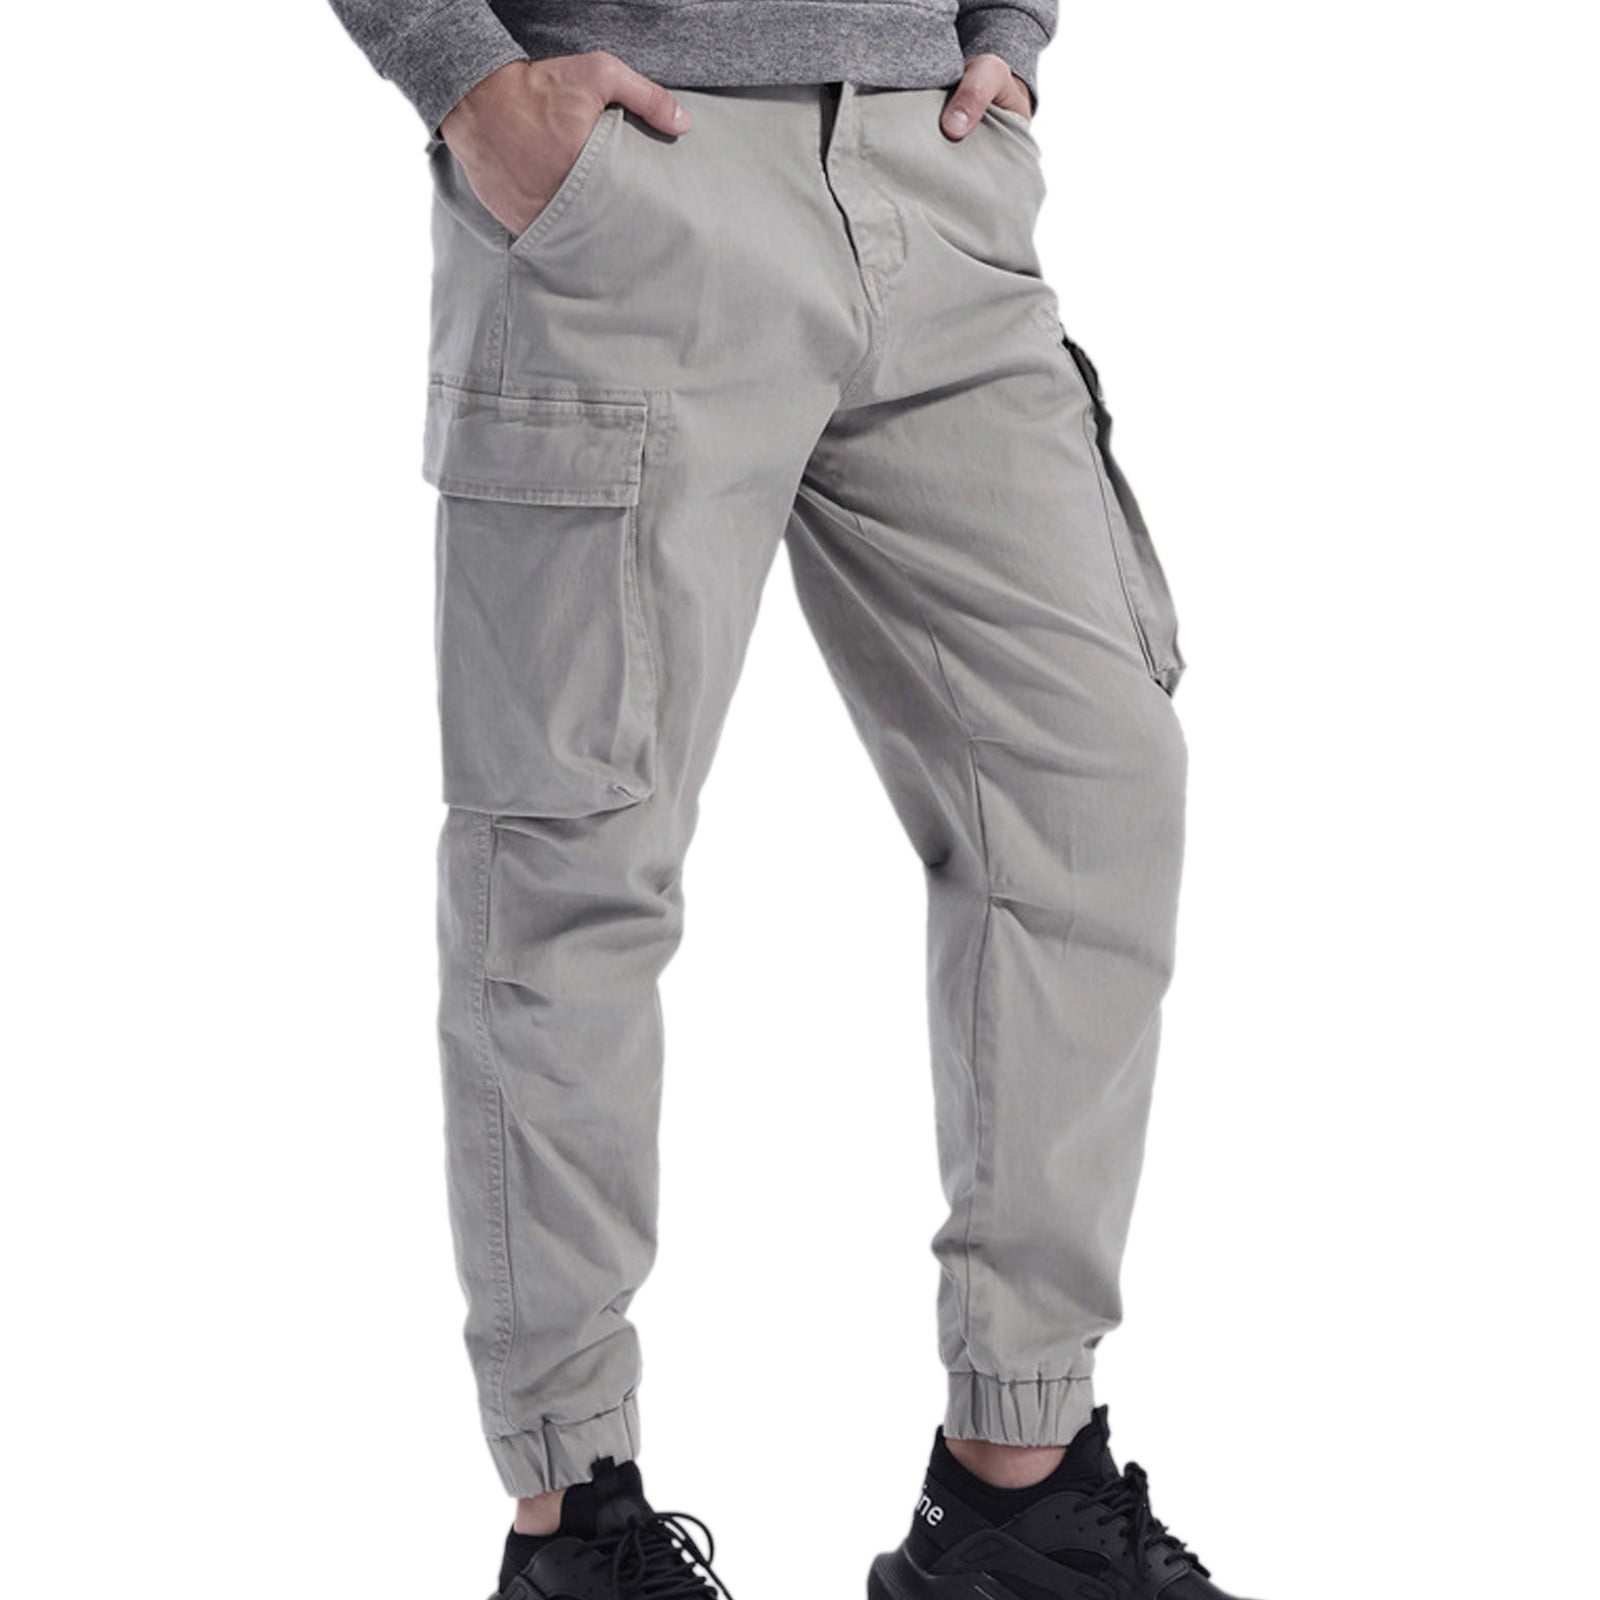 xinqinghao men pants casual men's mid-waist zip cargo pants relaxed fit  solid cargo trousers with multi-pocket baggy overalls gray 32 